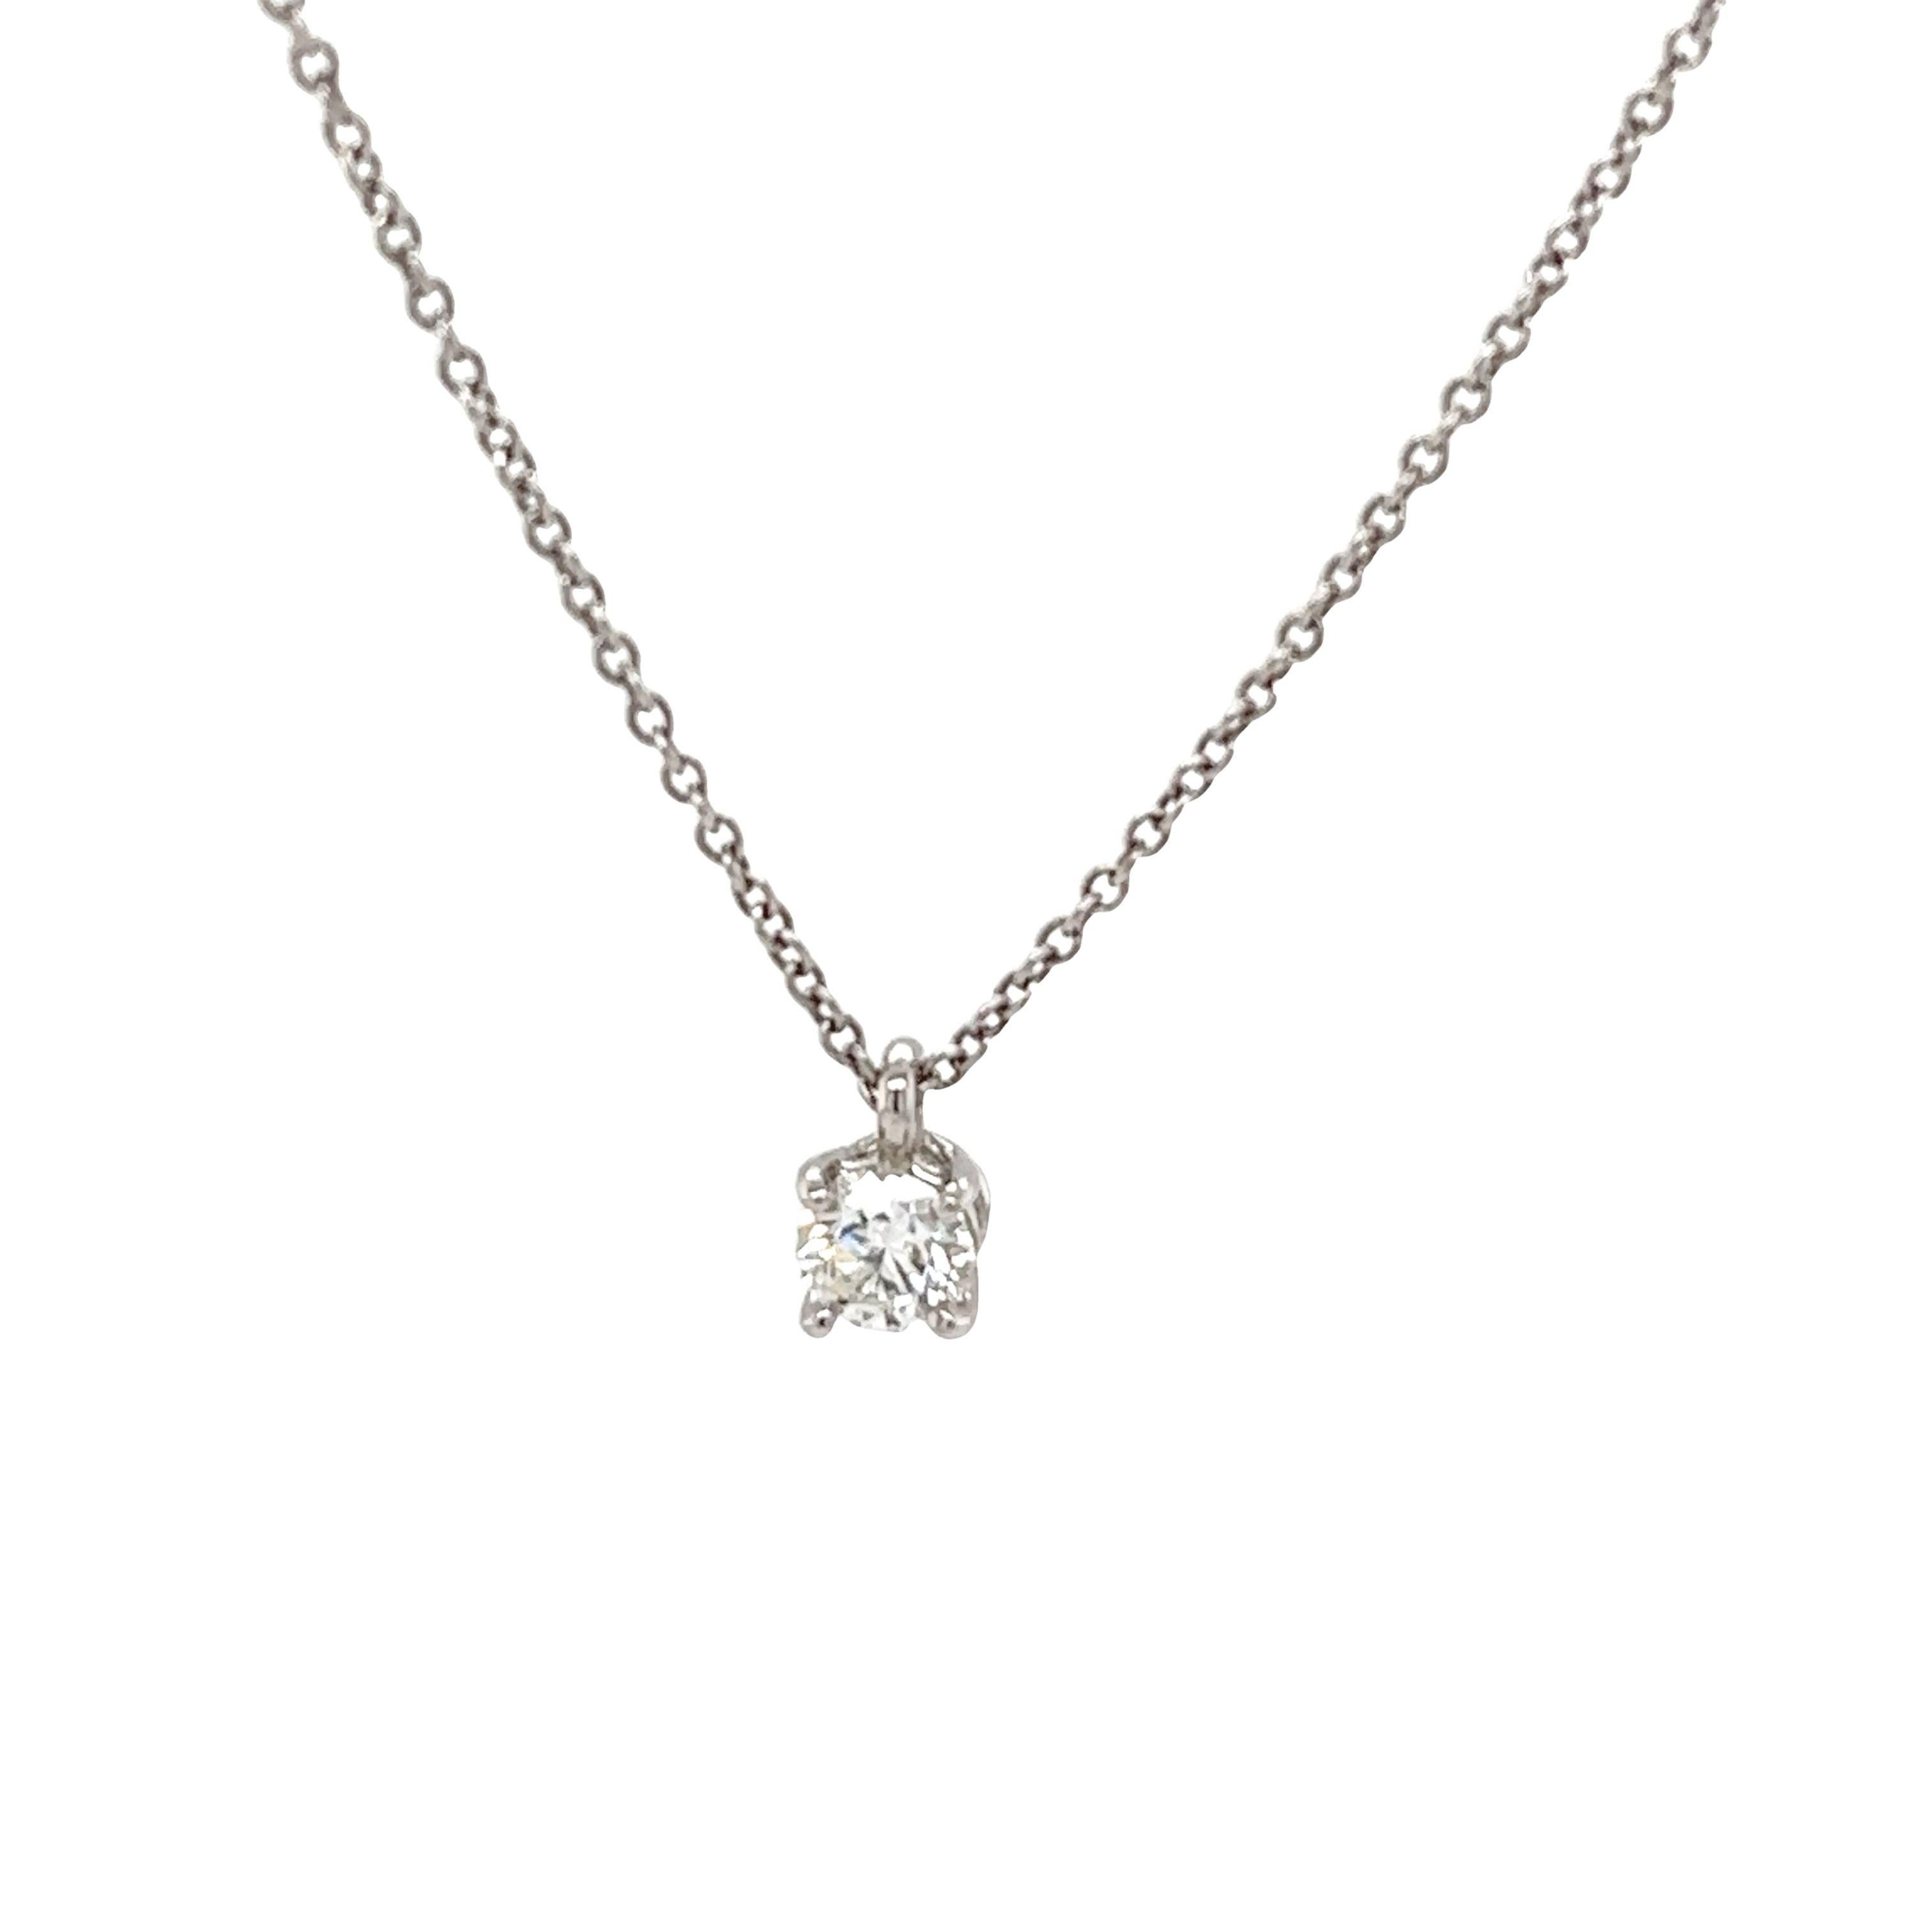 Tiffany & Co. solitaire diamond necklace 0.24ct on 16